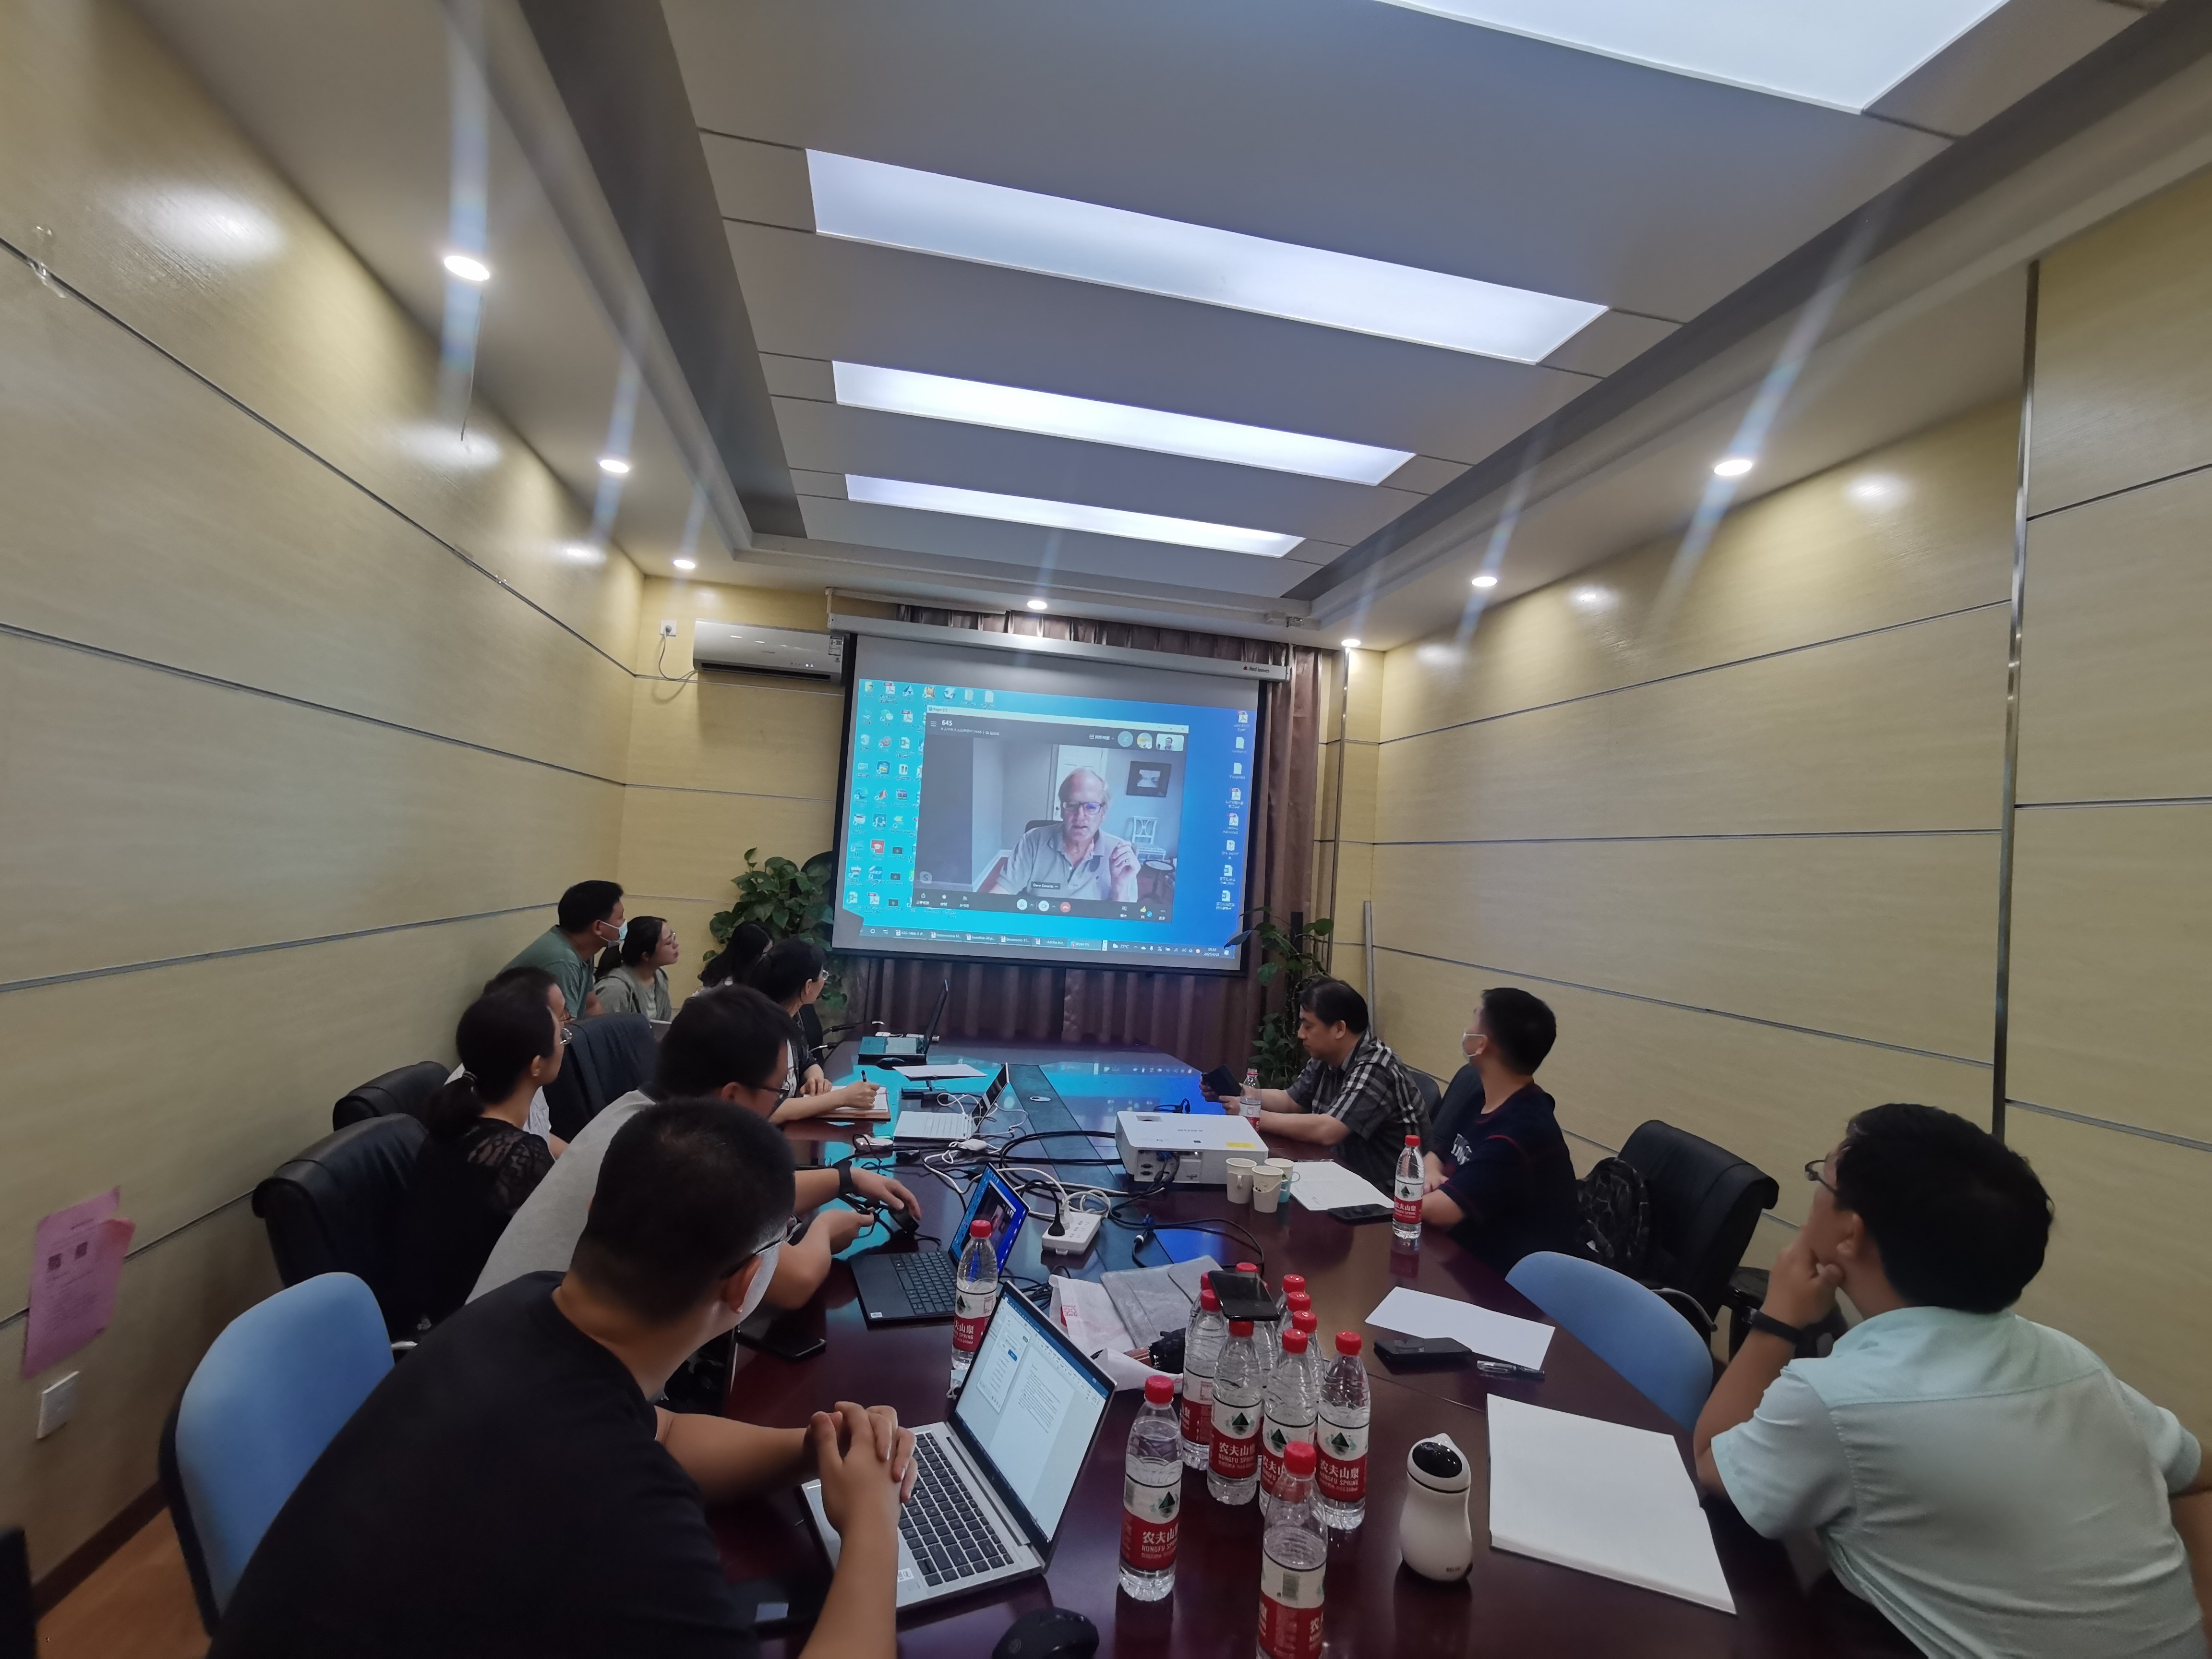 6.45 Micron Mid-infrared Medical Laser Technology Seminar Conducted by TIPC